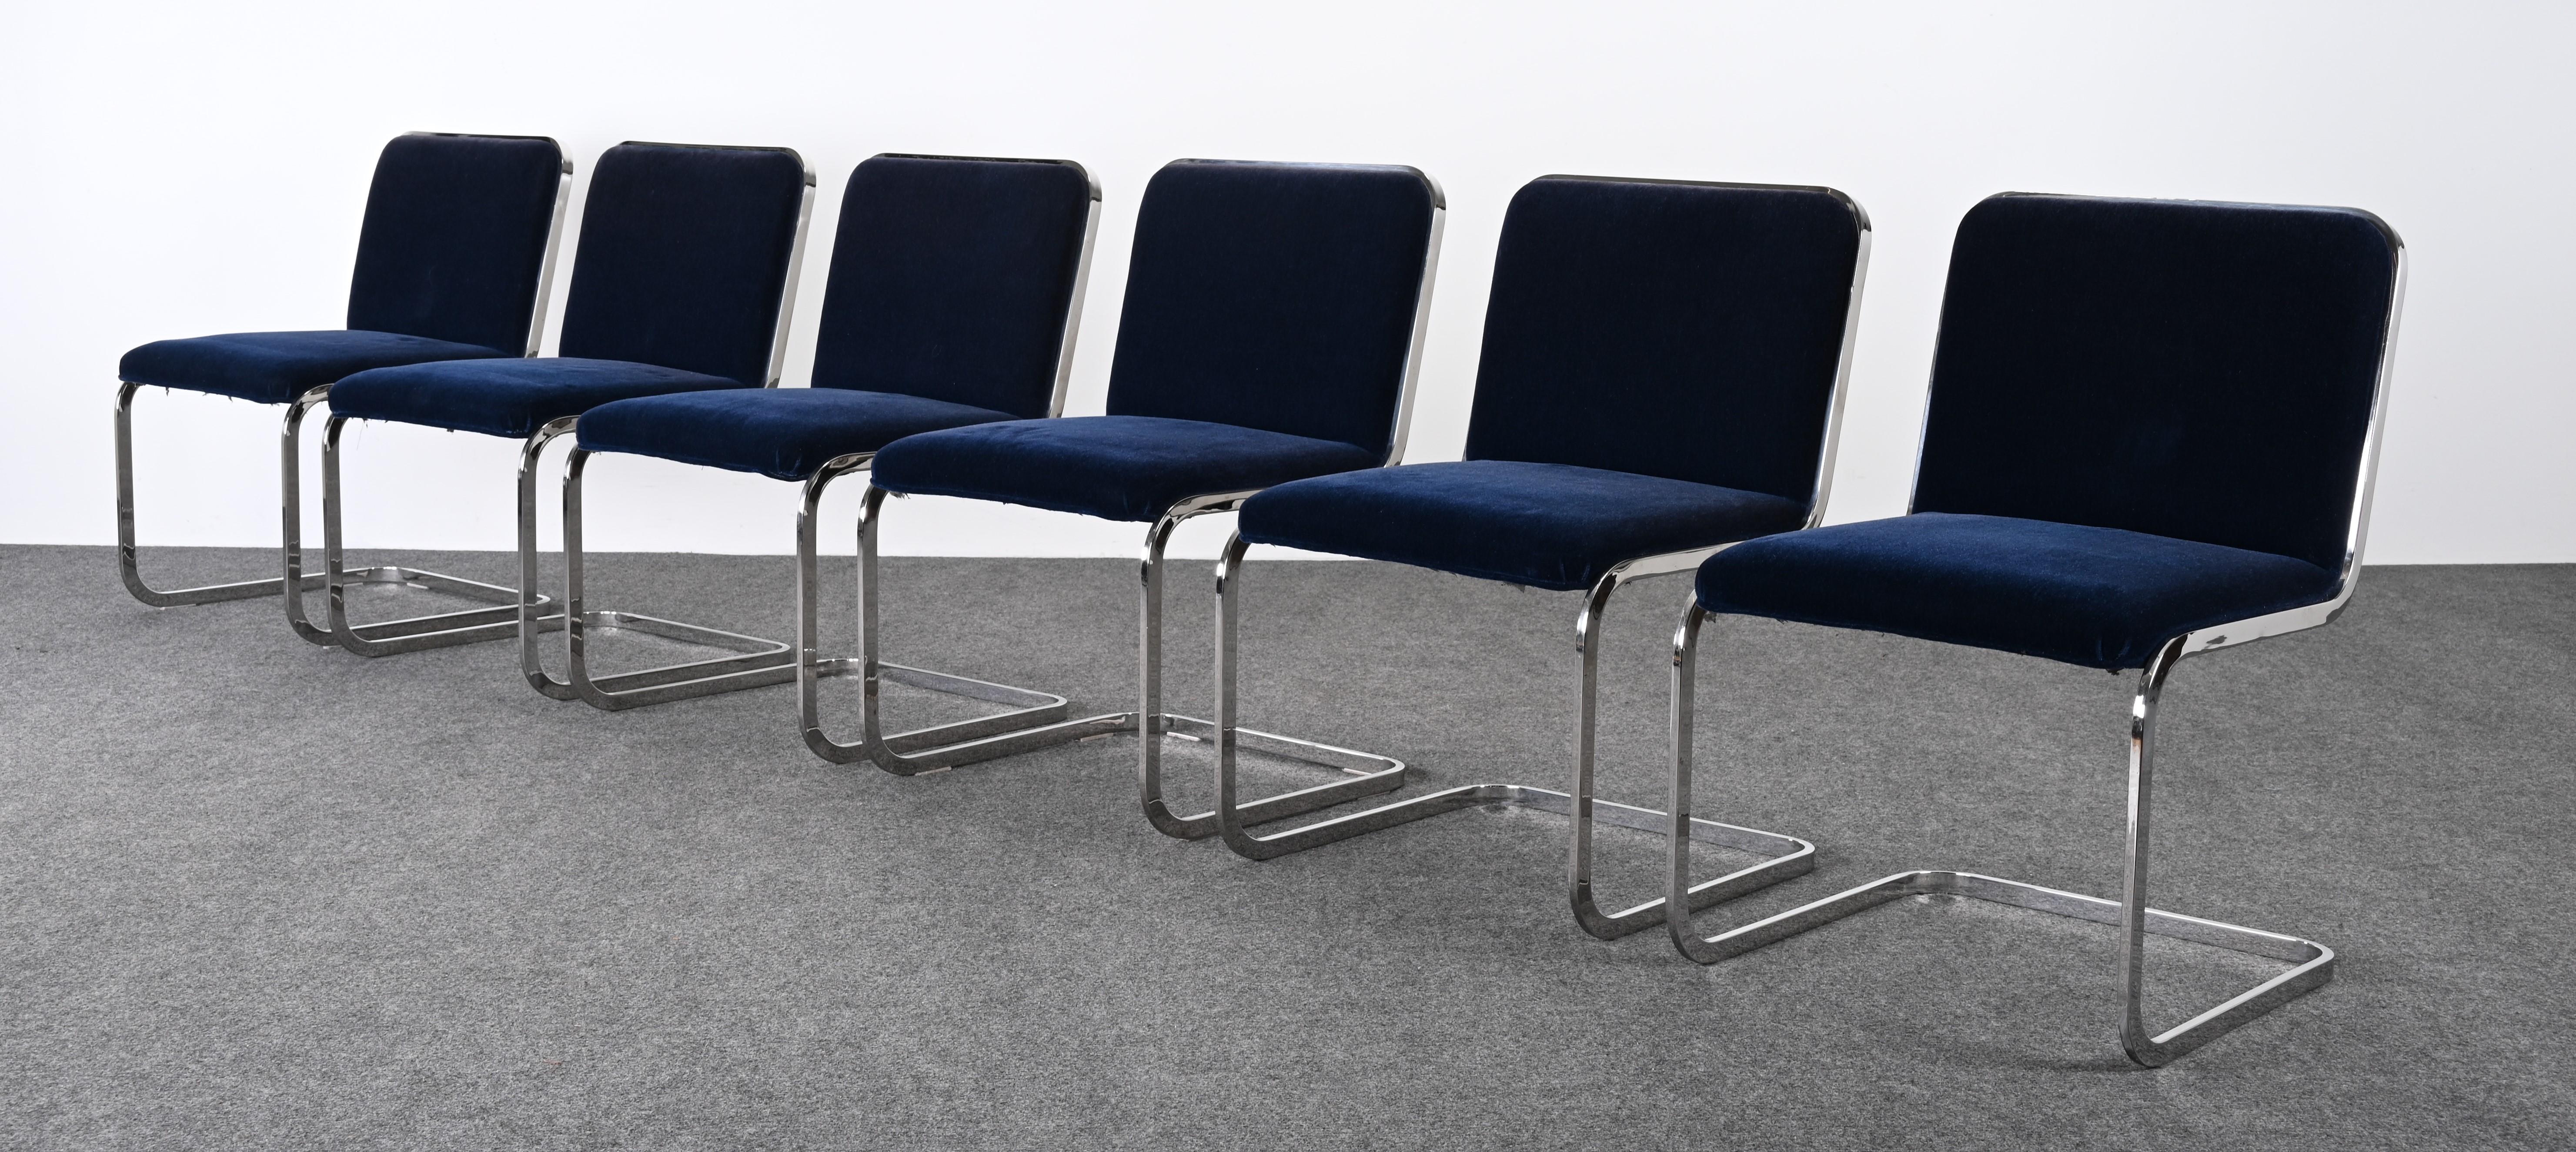 A stunning set of six dining chairs by Brueton, circa 1980s. The cantilever chairs are classic Mid-Century Modern design. The dark cobalt blue mohair is in very good condition and the chairs are ready to place. This high-quality set has the look of